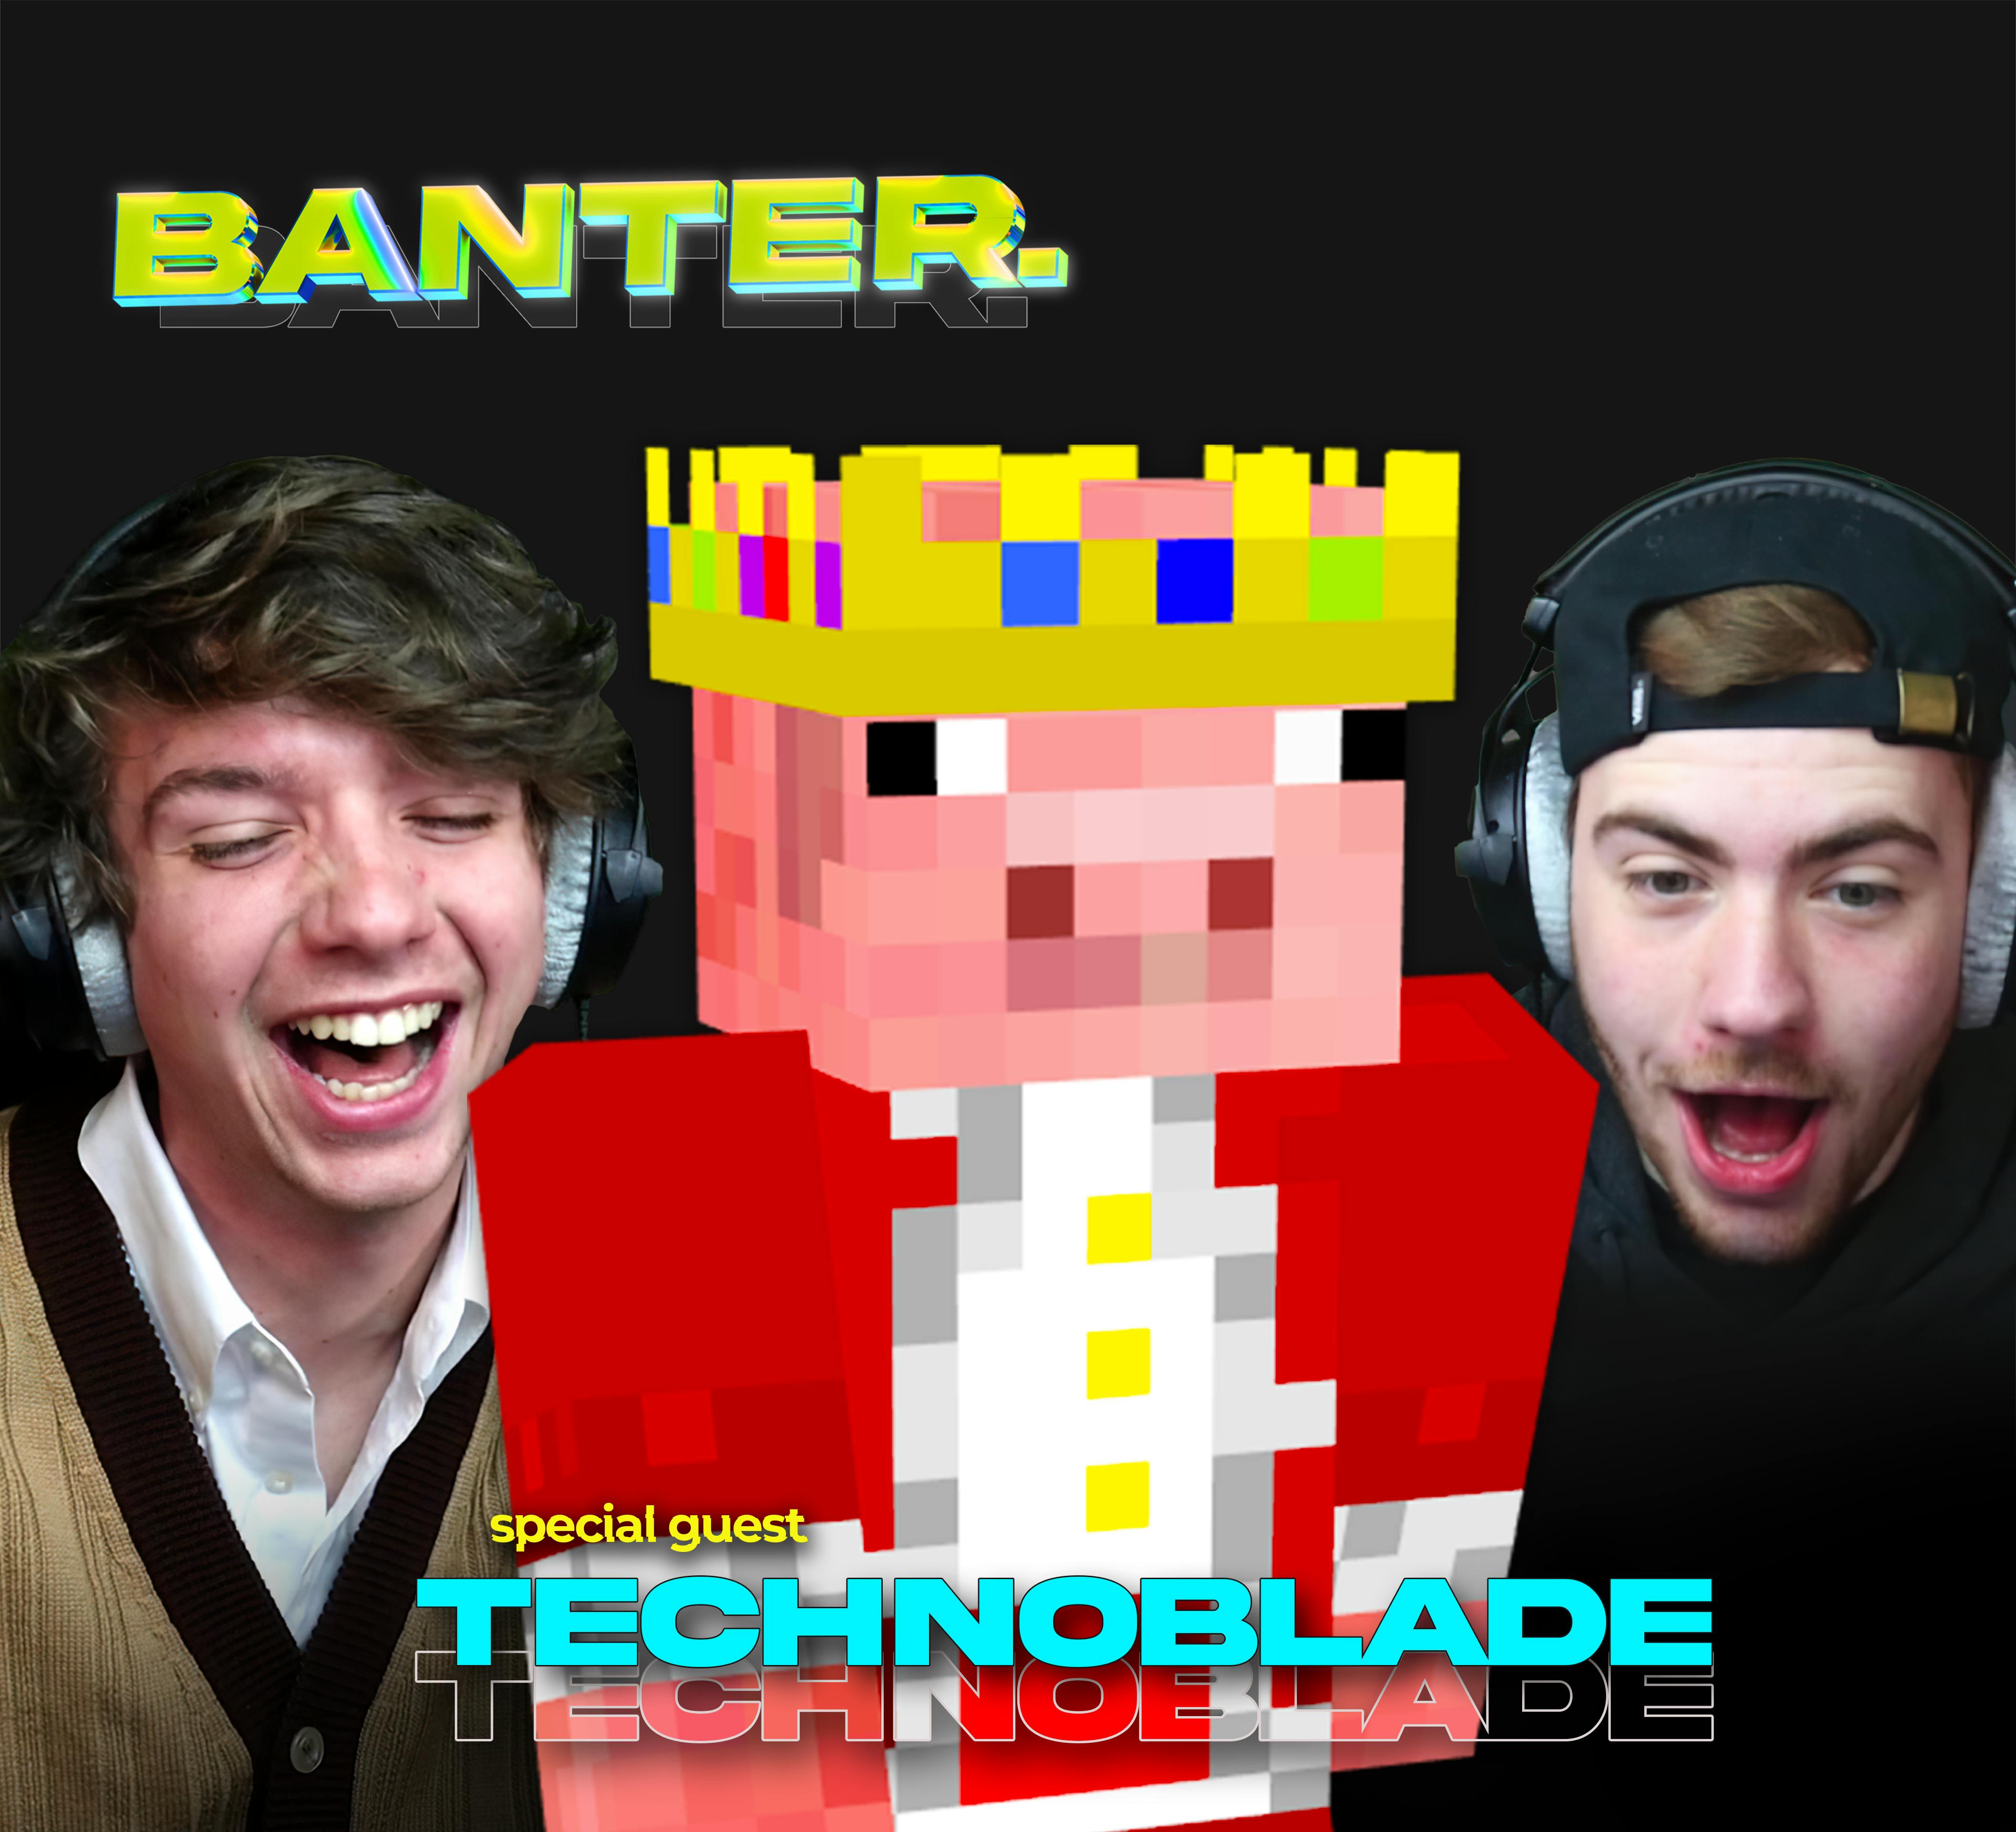 Twitch - Ready for some great banter? GeorgeNotFound & Sapnap are